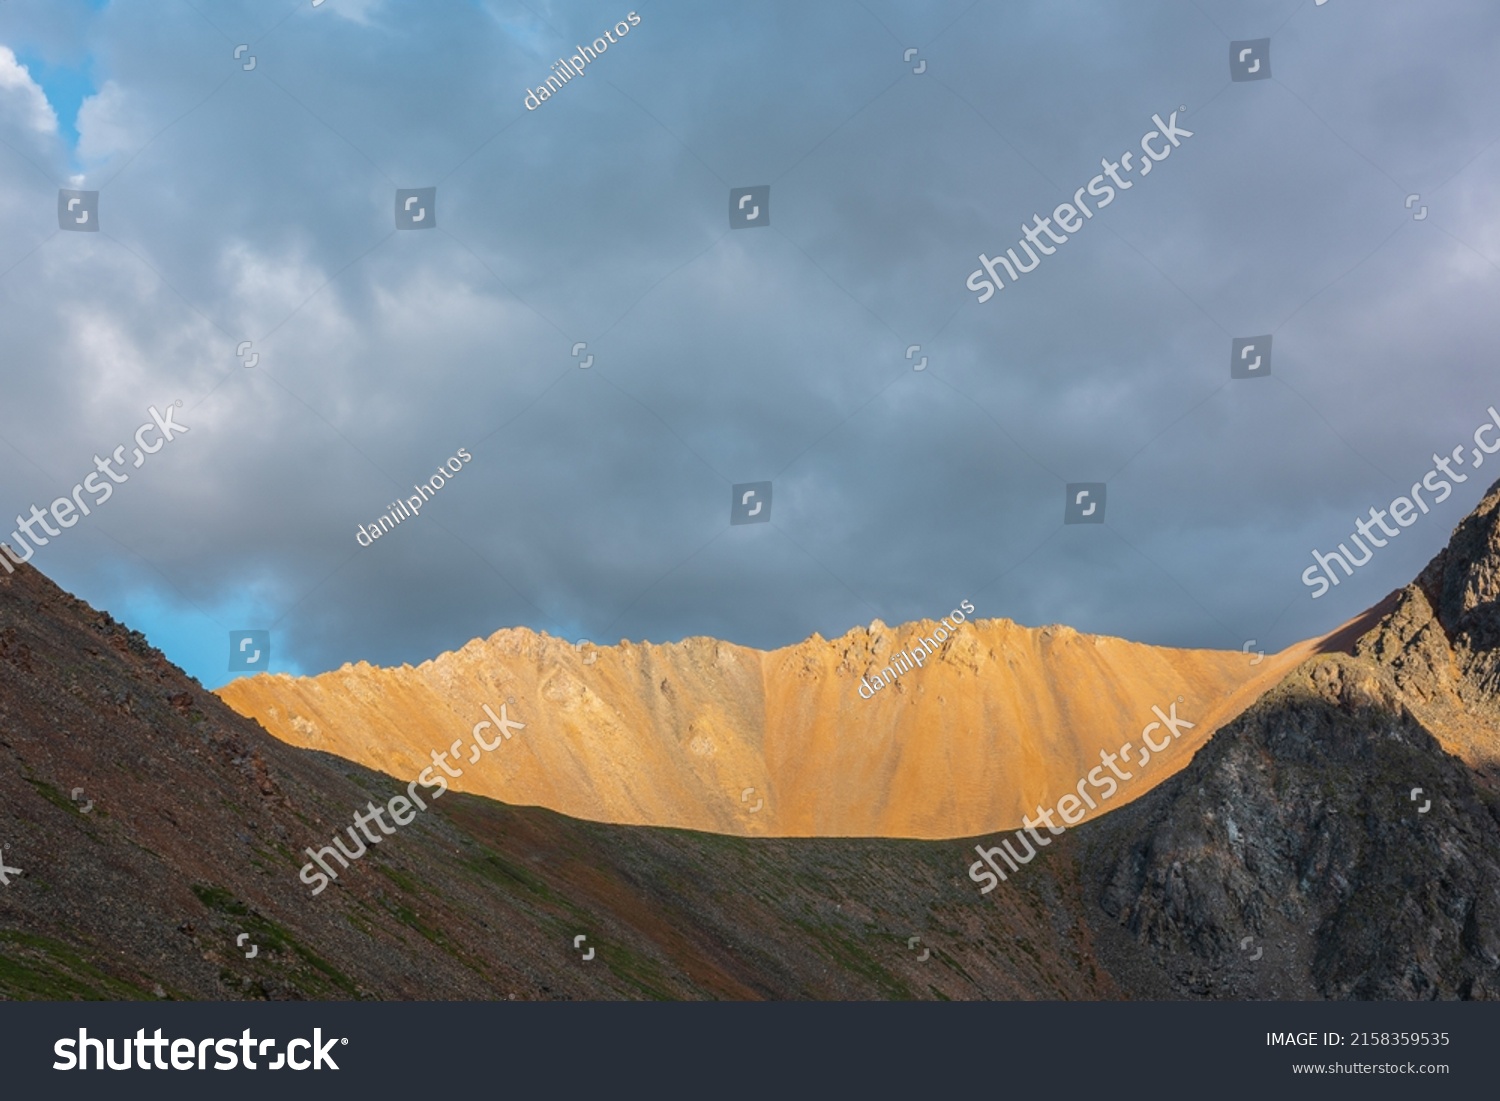 Dramatic alpine landscape with sunlit wide sharp mountain ridge under overcast sky at changeable weather. Atmospheric mountain scenery with large sharp rocks on ridge top in sunlight under cloudy sky. #2158359535